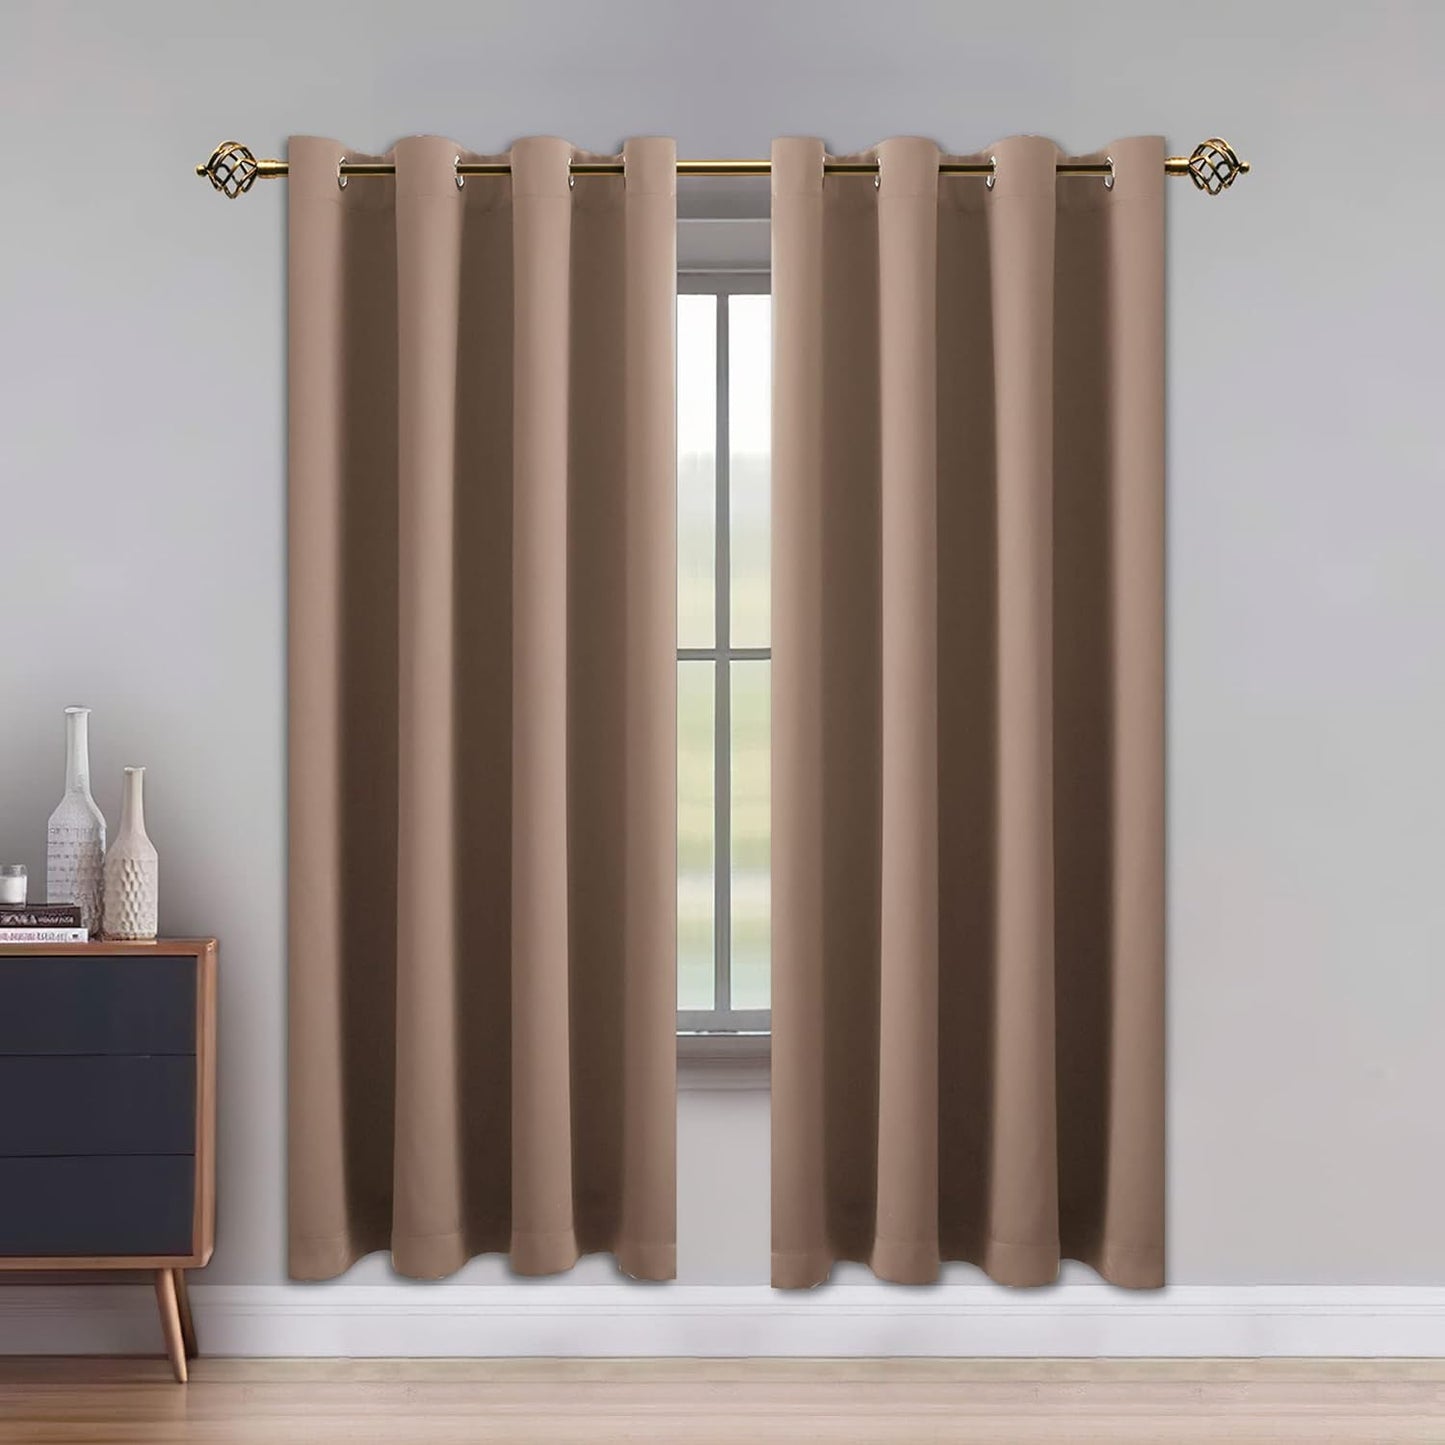 LUSHLEAF Blackout Curtains for Bedroom, Solid Thermal Insulated with Grommet Noise Reduction Window Drapes, Room Darkening Curtains for Living Room, 2 Panels, 52 X 63 Inch Grey  SHEEROOM Khaki 52 X 84 Inch 